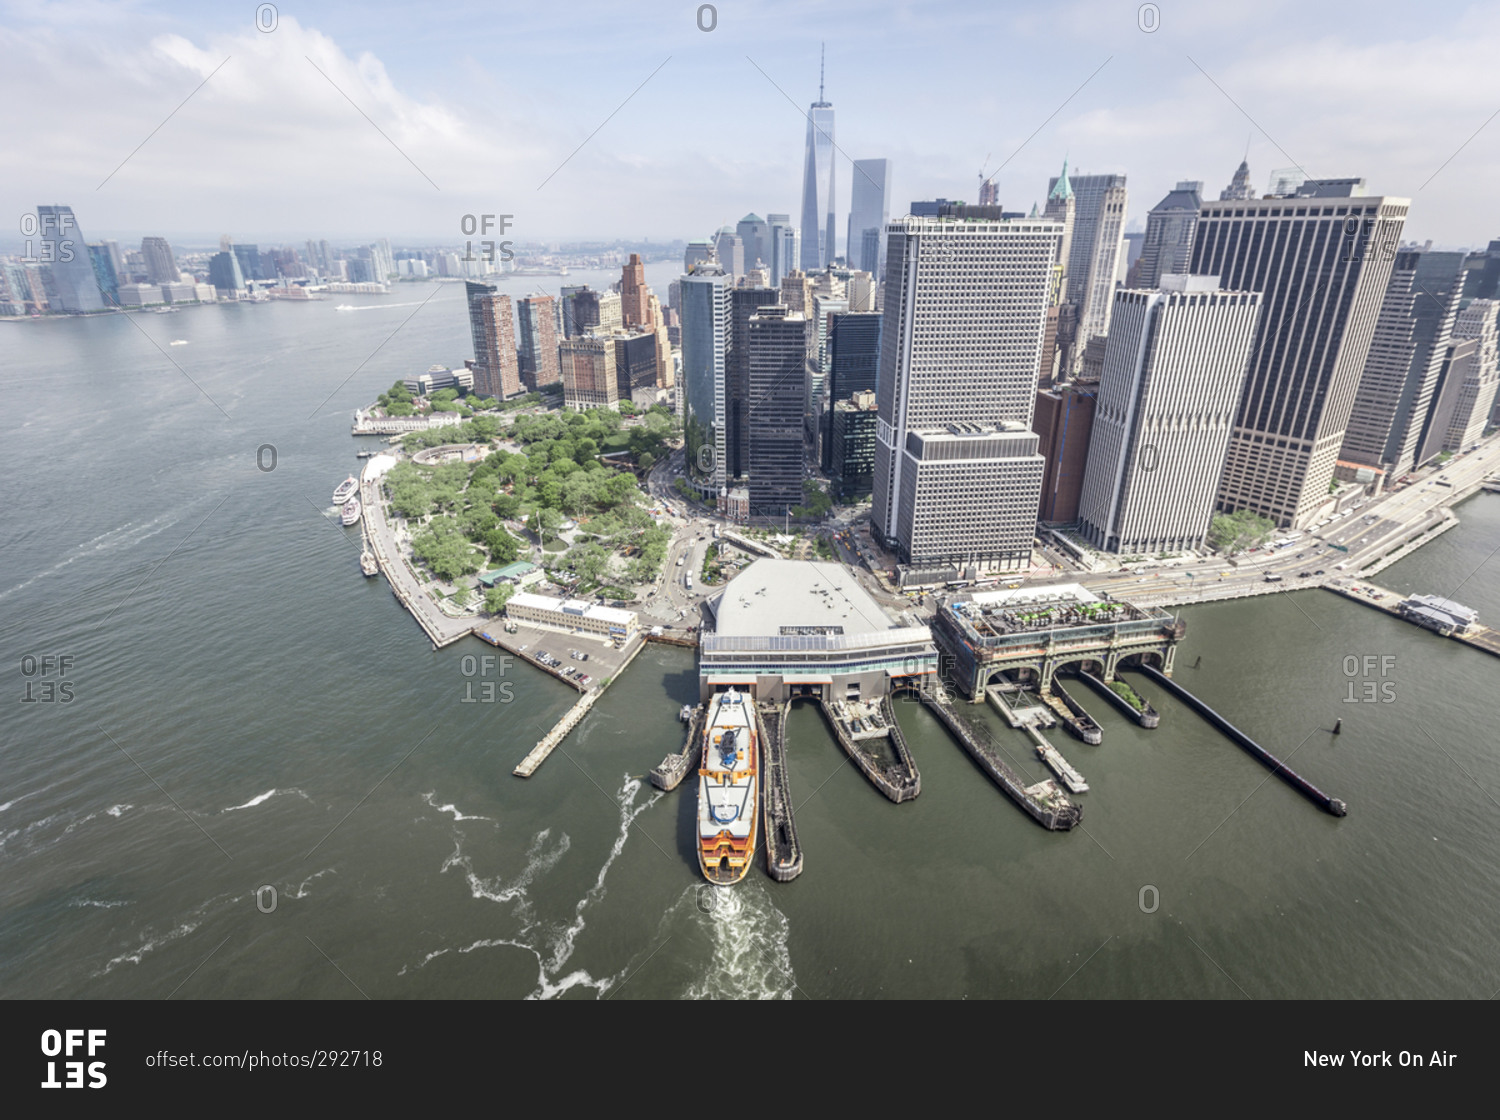 Aerial view of lower Manhattan, New York City, NY